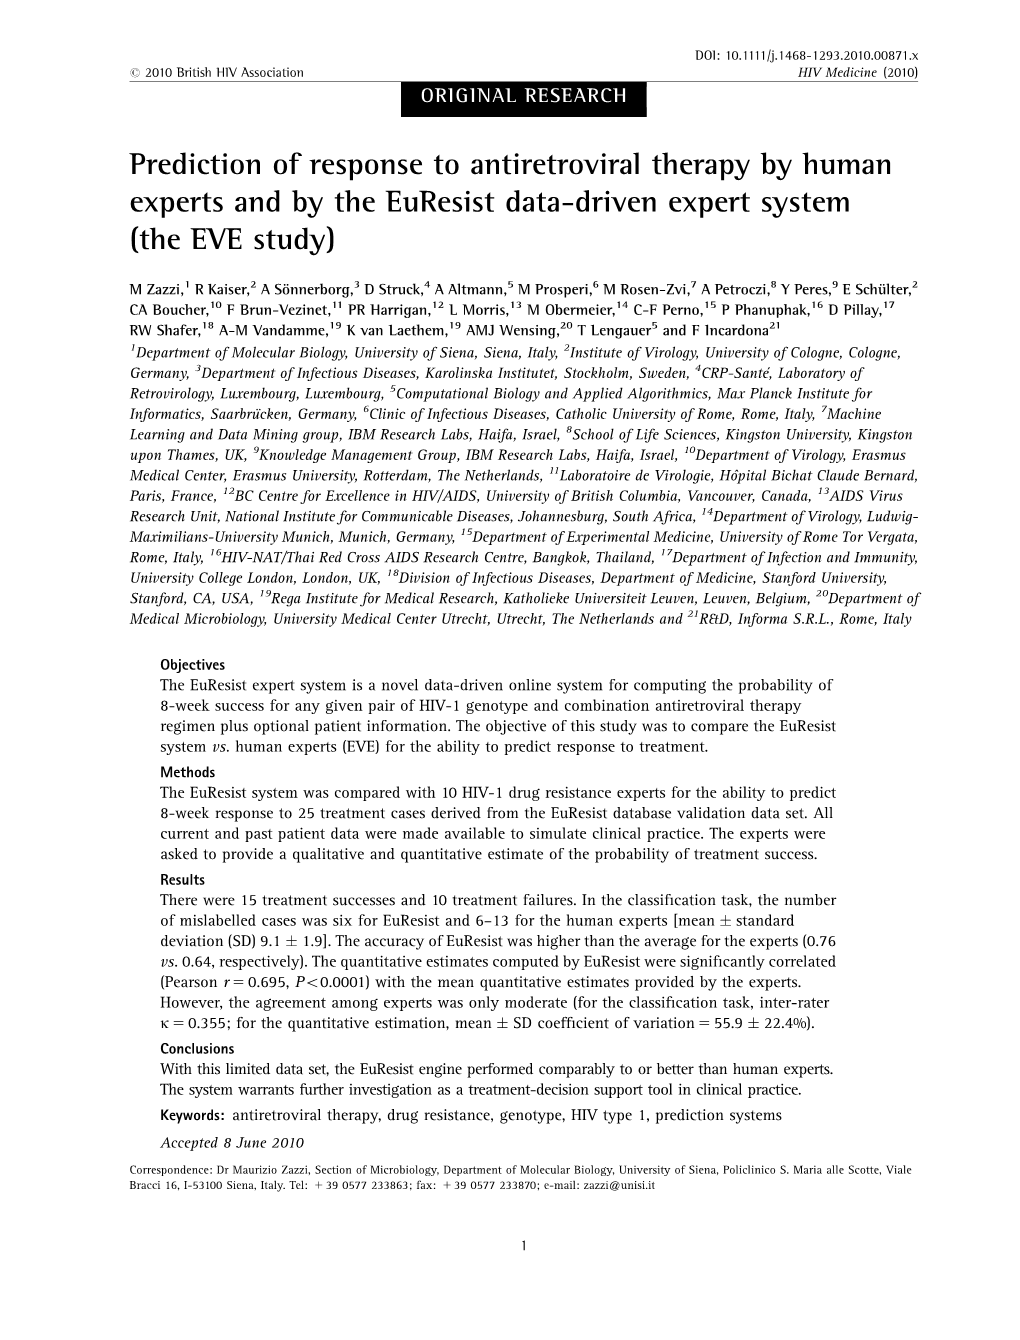 Prediction of Response to Antiretroviral Therapy by Human Experts and by the Euresist Data-Driven Expert System (The EVE Study)